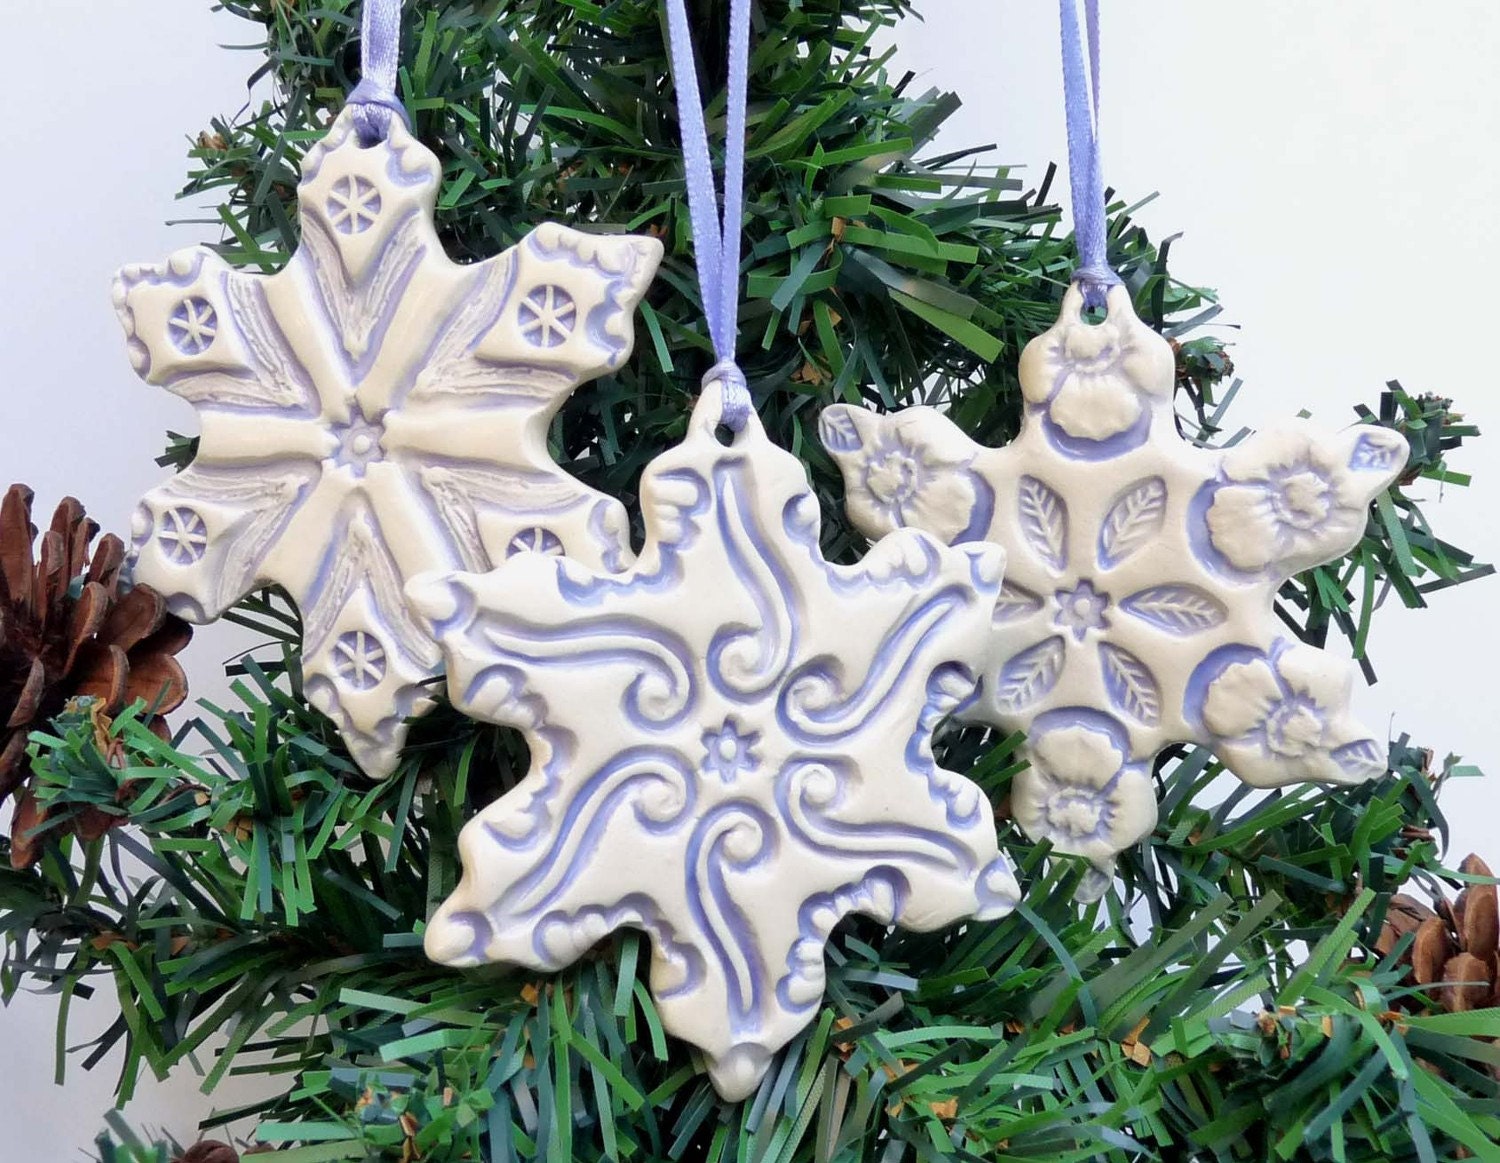 Christmas Ornament Ceramic Holiday Snowflake Ornaments Set of Three Blue and White Holiday Cheer